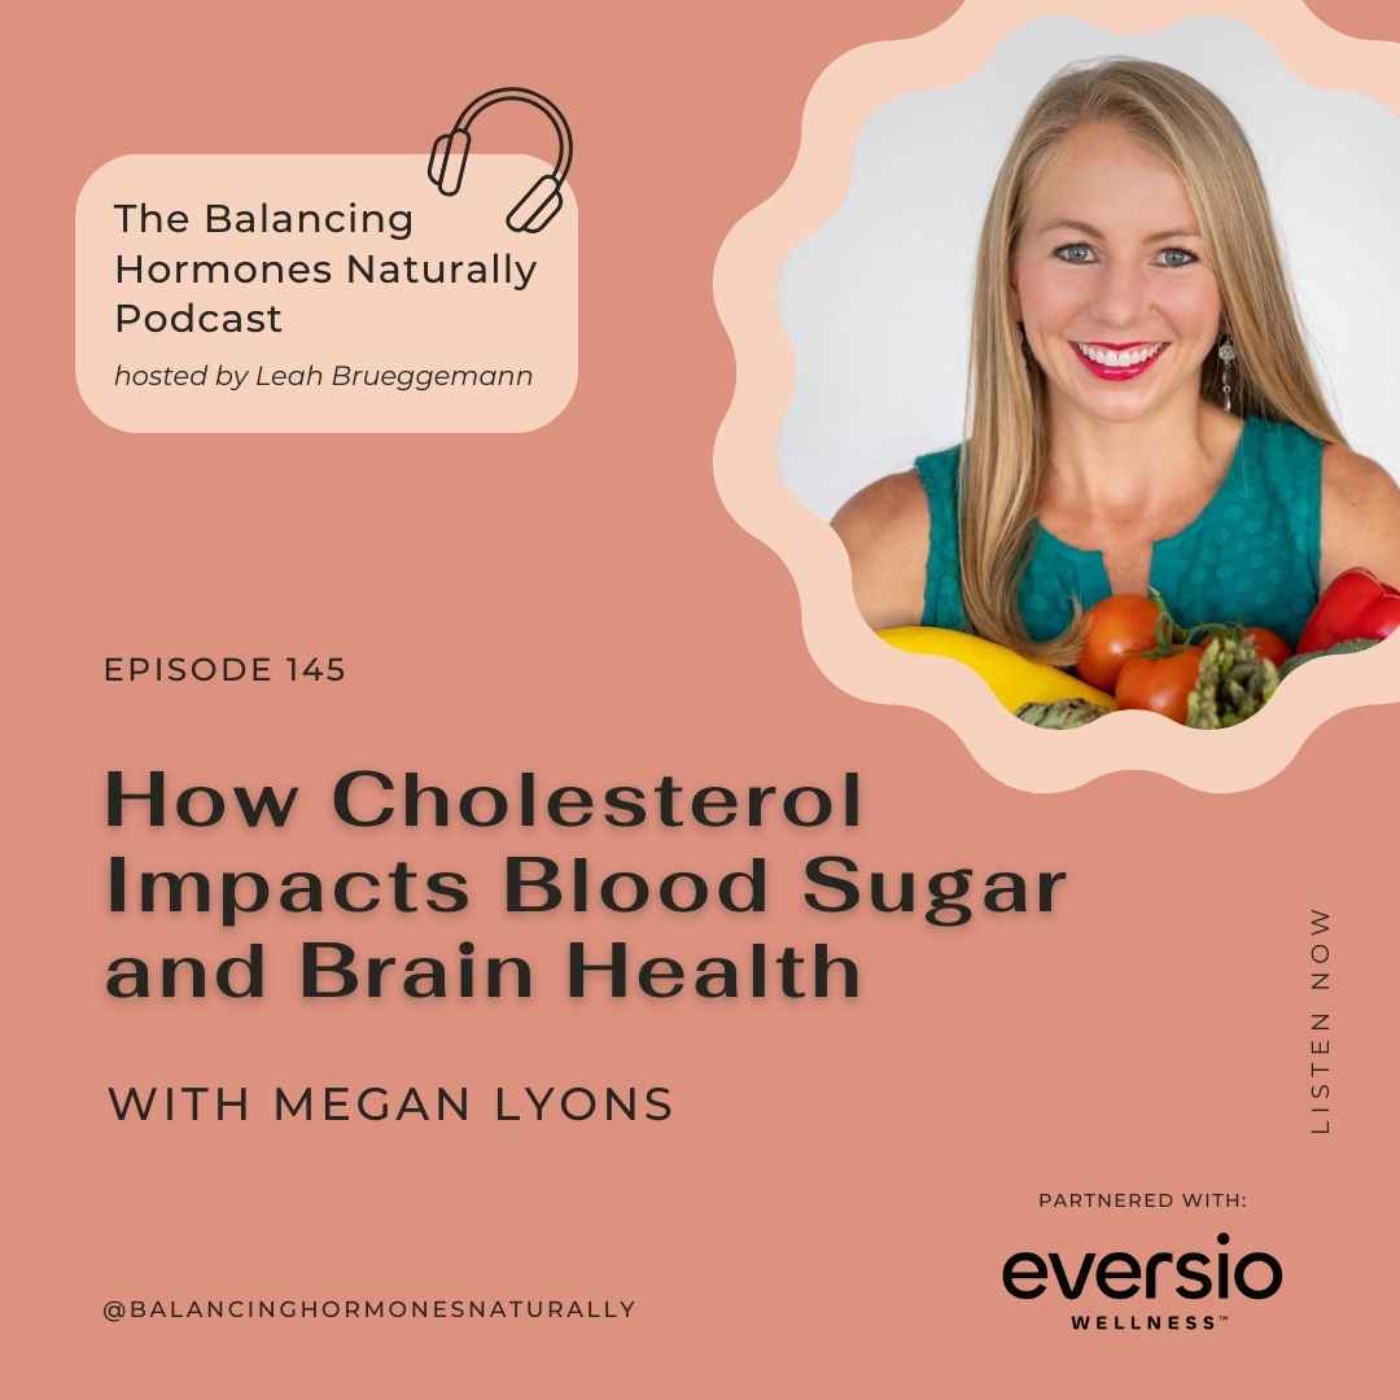 Episode 145: How Cholesterol Impacts Blood Sugar and Brain Health